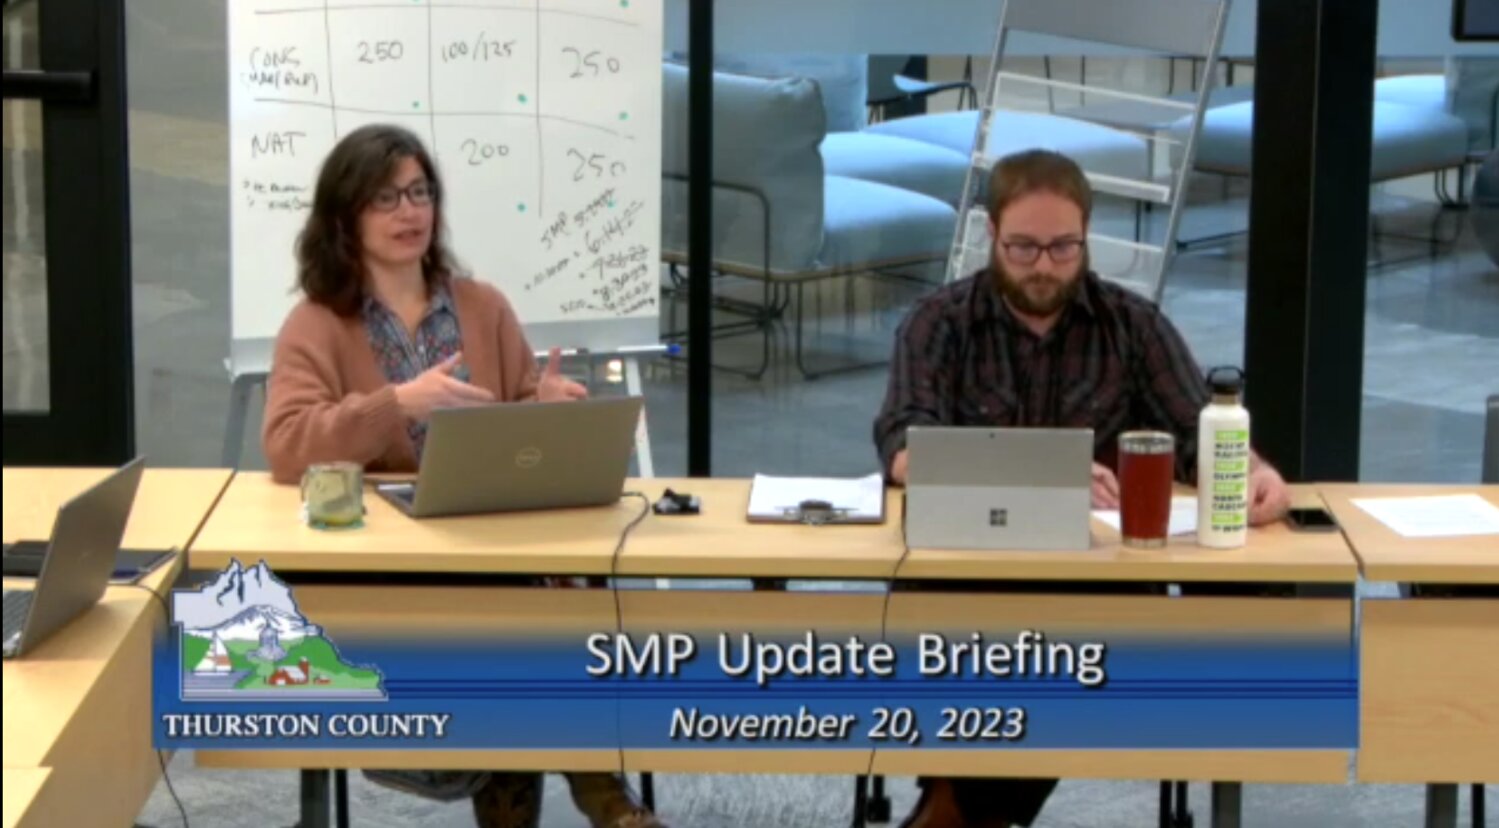 Community Planning Manager Ashley Arai (left) and Senior Planner Andrew Deffobis (right) discuss with the county commissioners whether they want to exclude 100-year floodplains in the county’s Shoreline Master Program.